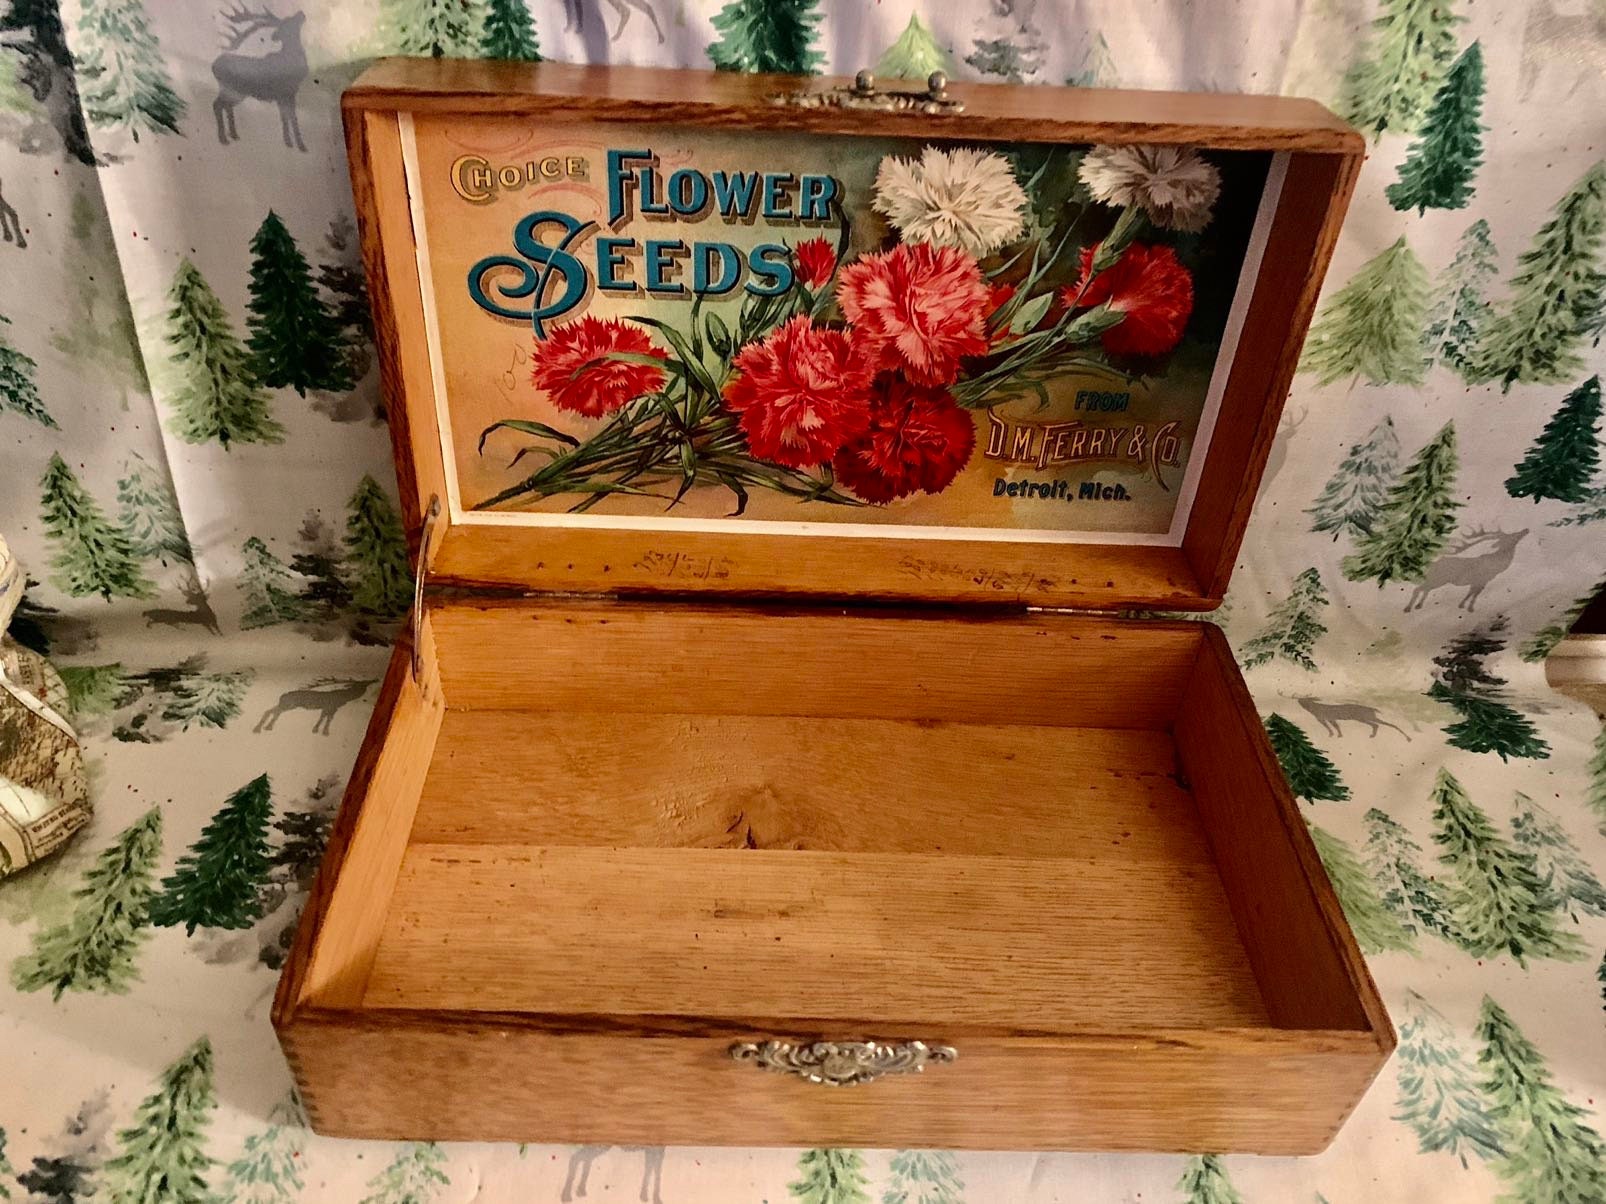 Choice FLOWER SEEDS, Old Vintage SEED BOX, D.M Ferry, Detroit – TheBoxSF